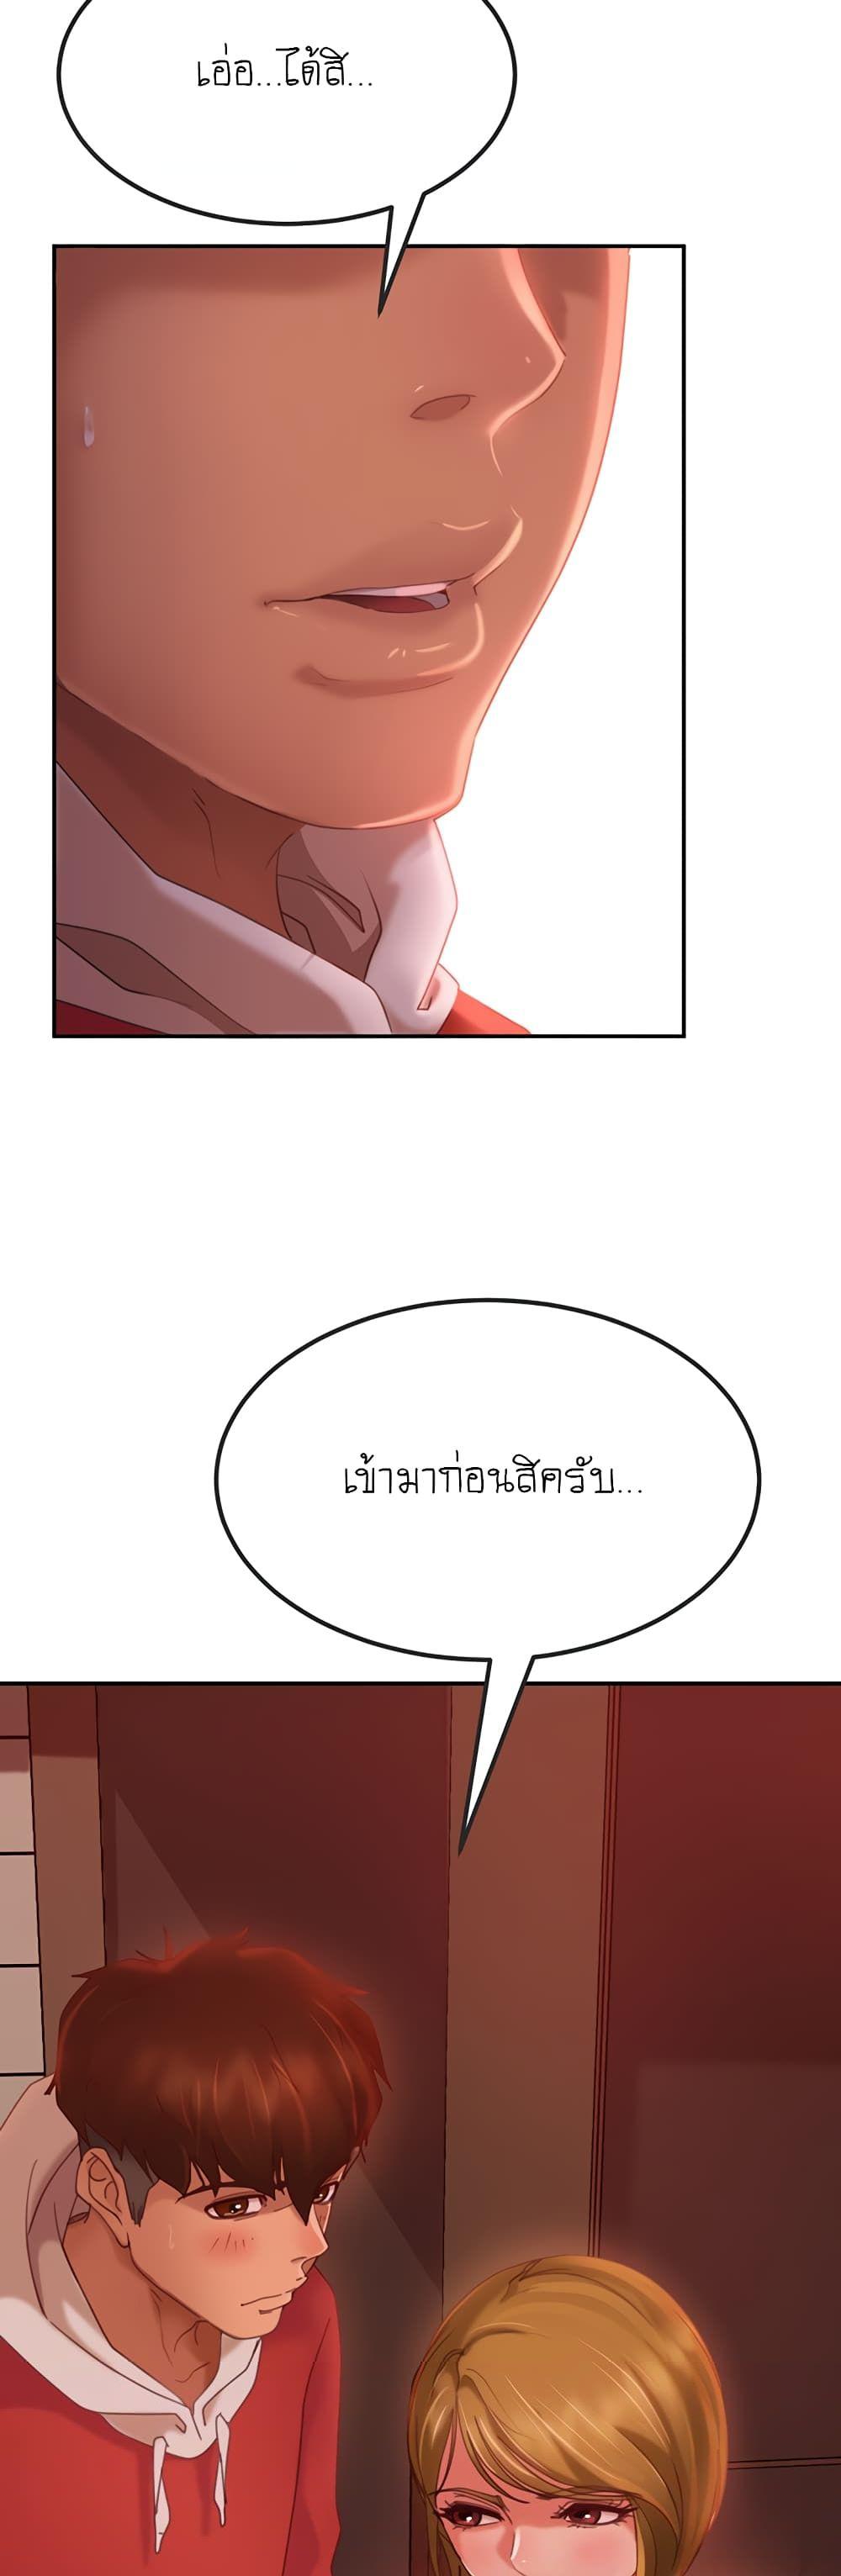 A Twisted Day 4 ภาพ 4